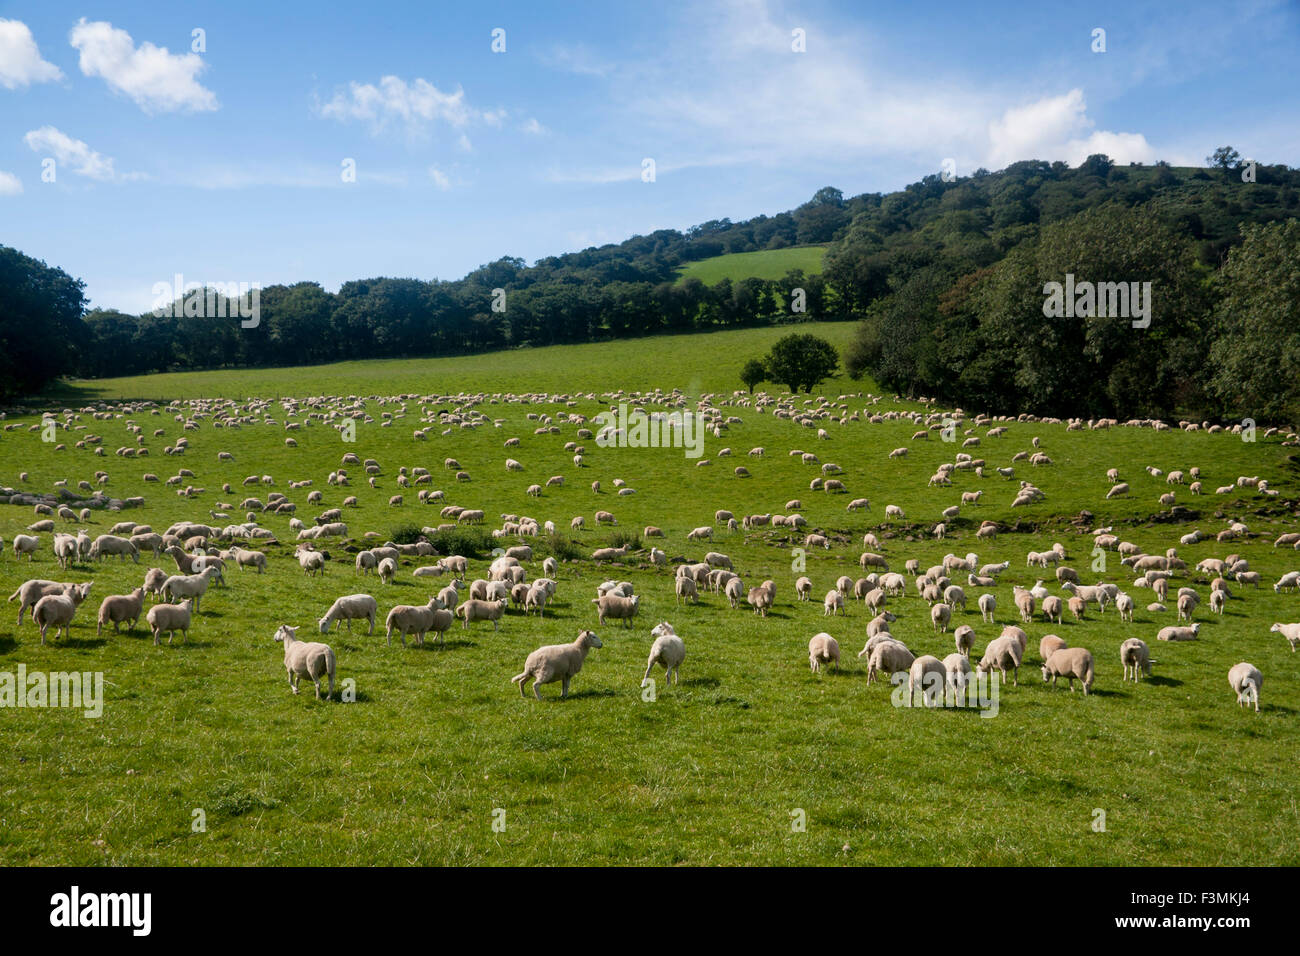 Large flock of sheep in green field Brecon Beacons Powys Wales UK Stock Photo